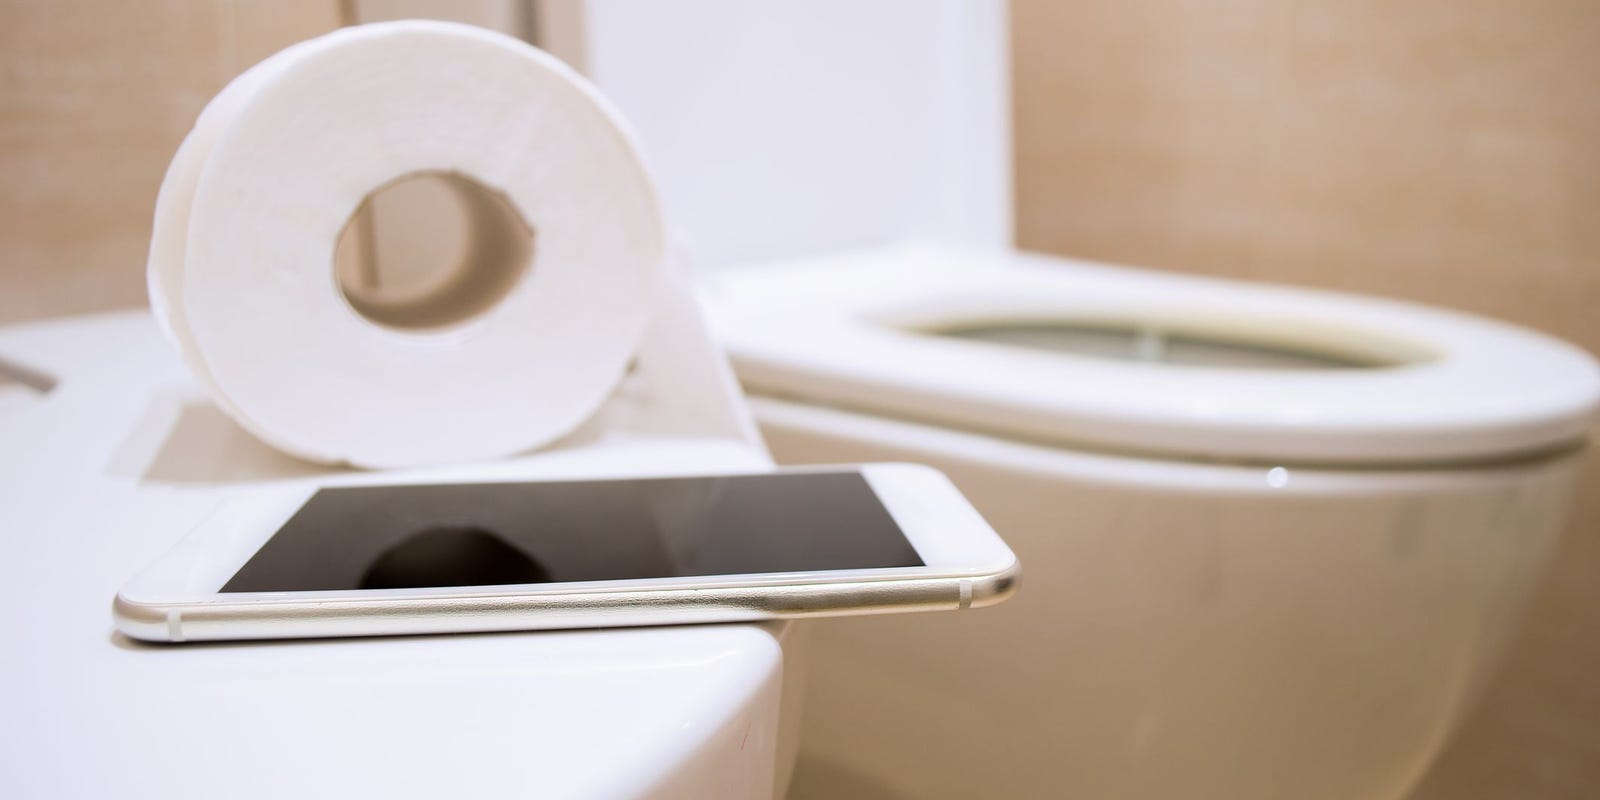 iphone and toilet_